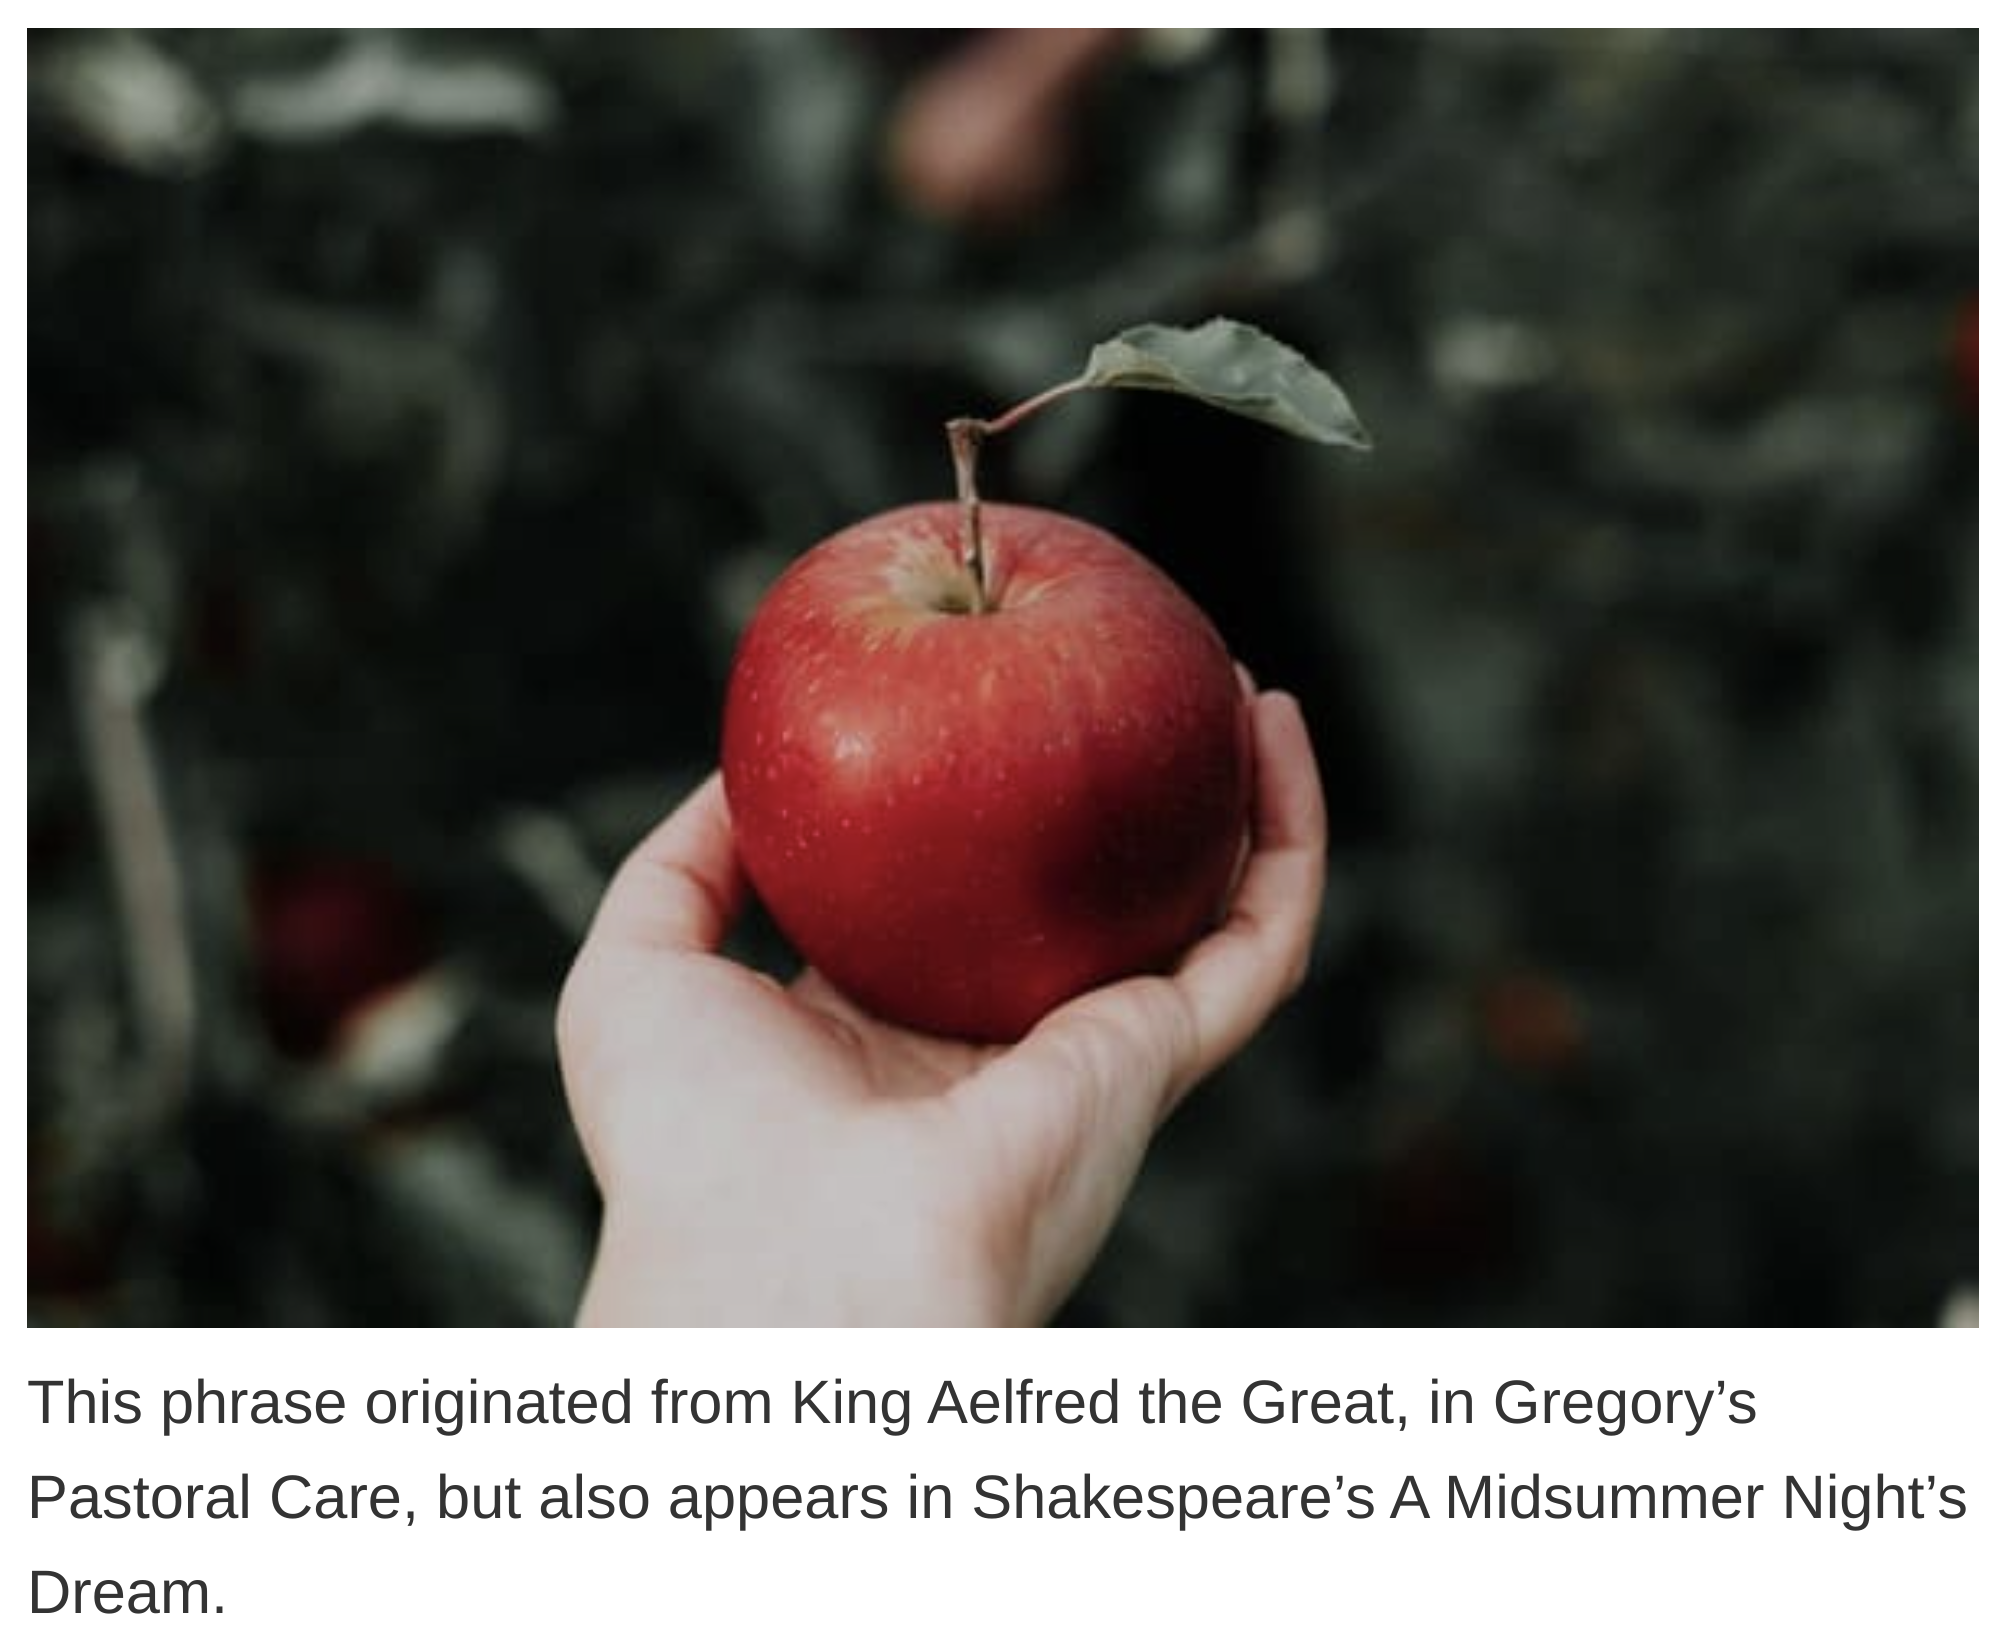 etymology english language -- apple on hand - This phrase originated from King Aelfred the Great, in Gregory's Pastoral Care, but also appears in Shakespeare's A Midsummer Night's Dream.